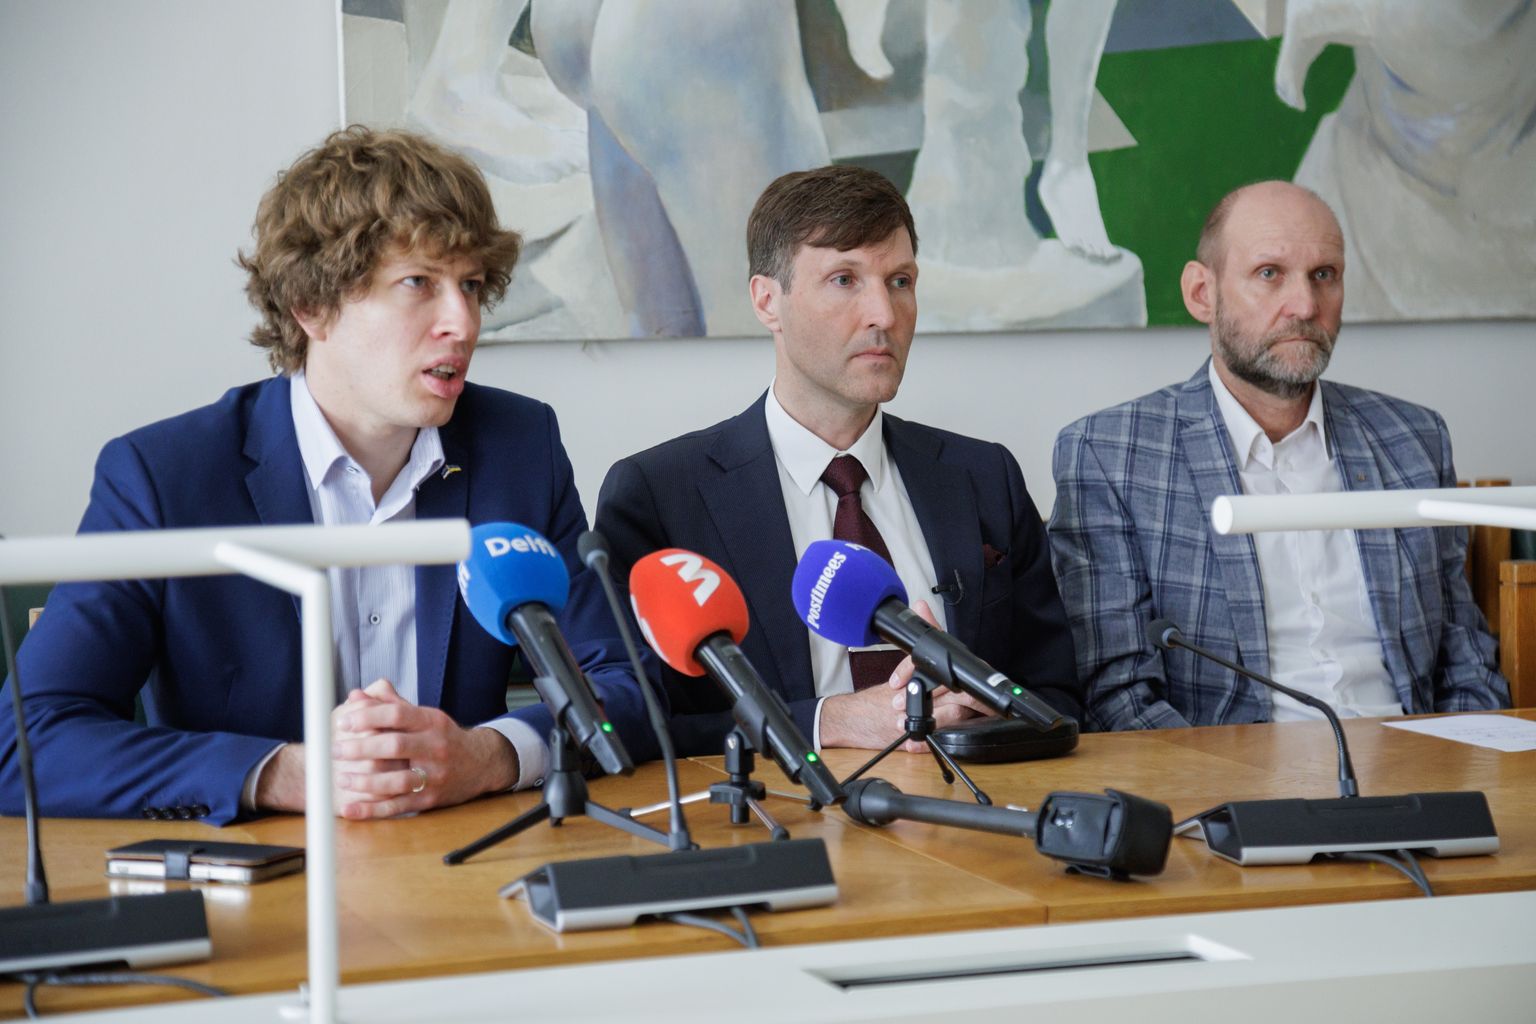 The opposition in the Riigikogu has decided to challenge the behavior of coalition MPs in parliament at the beginning of this week in the Supreme Court. (From left) Tanel Kiik, Martin Helme and Helir Valdor Seeder.